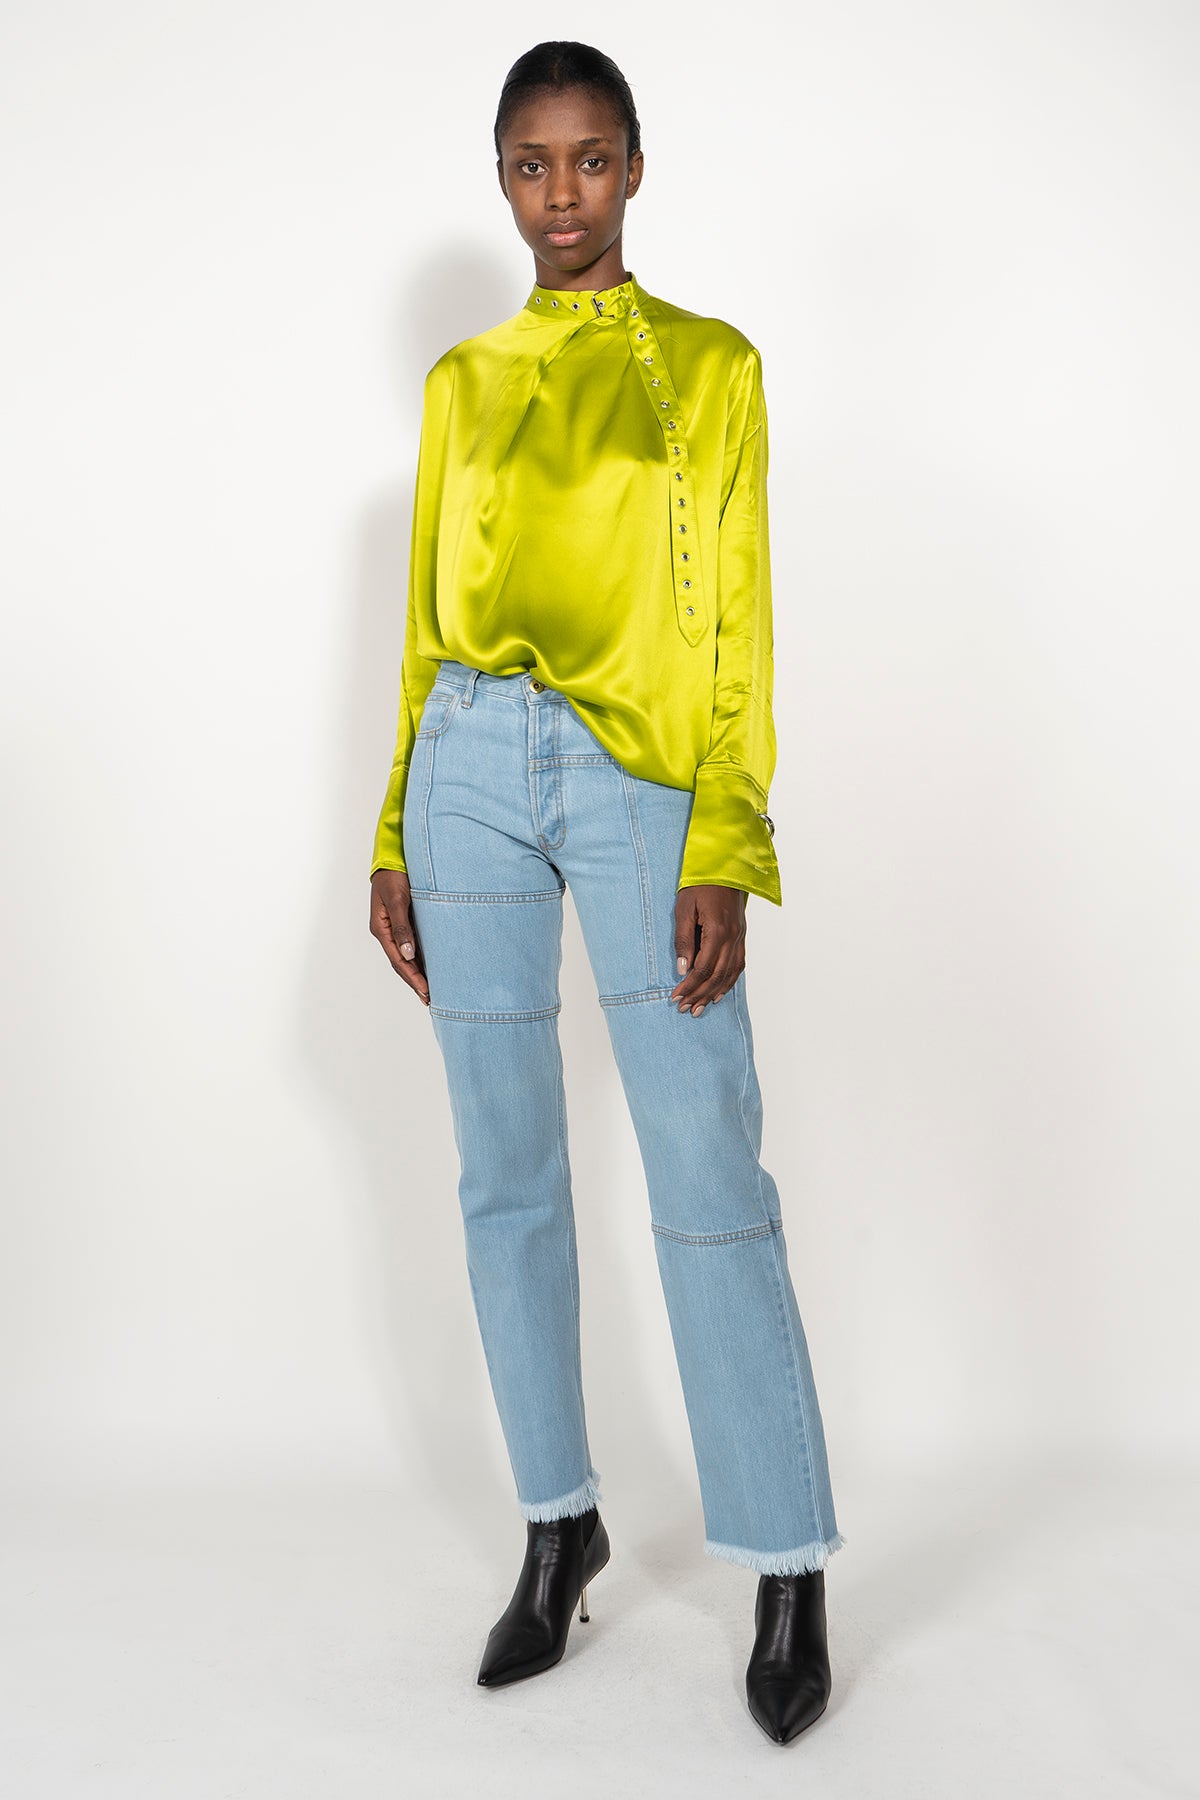 PANELLED JEANS marques almeida